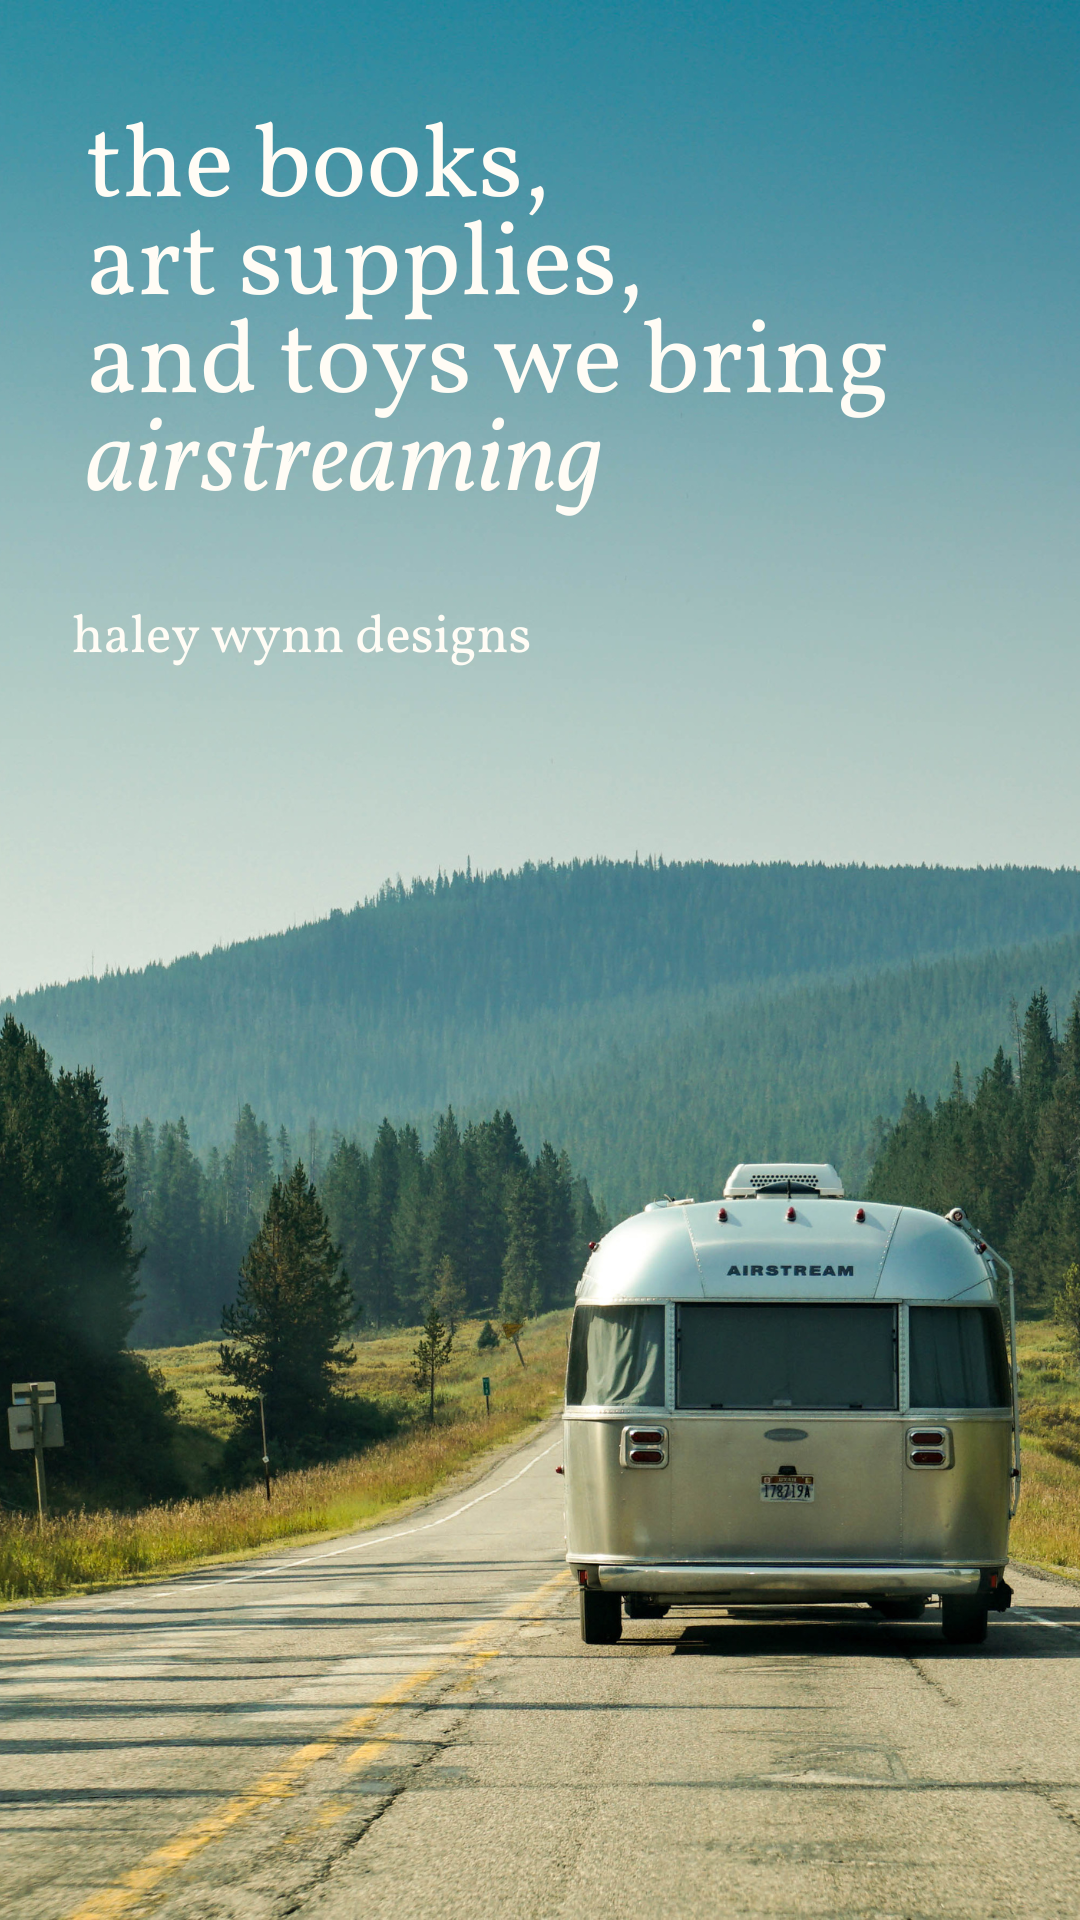 Copy of airstream toys.png